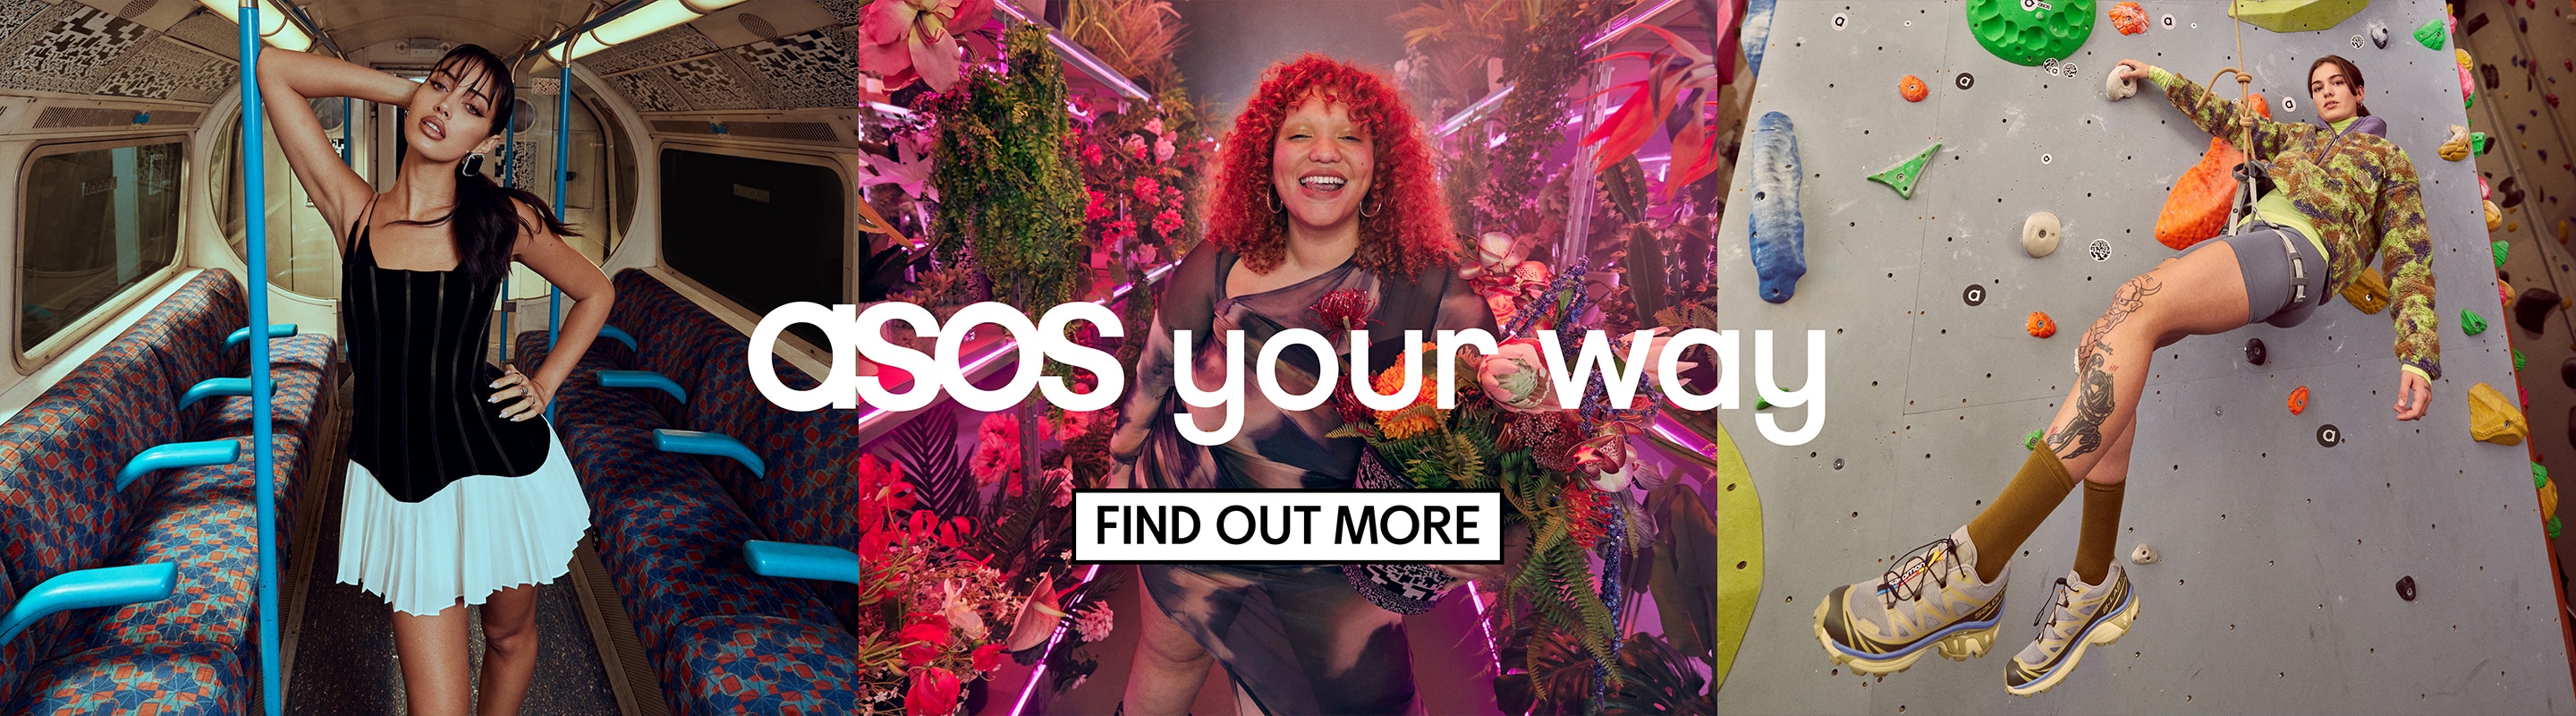 Asos your way - find out more